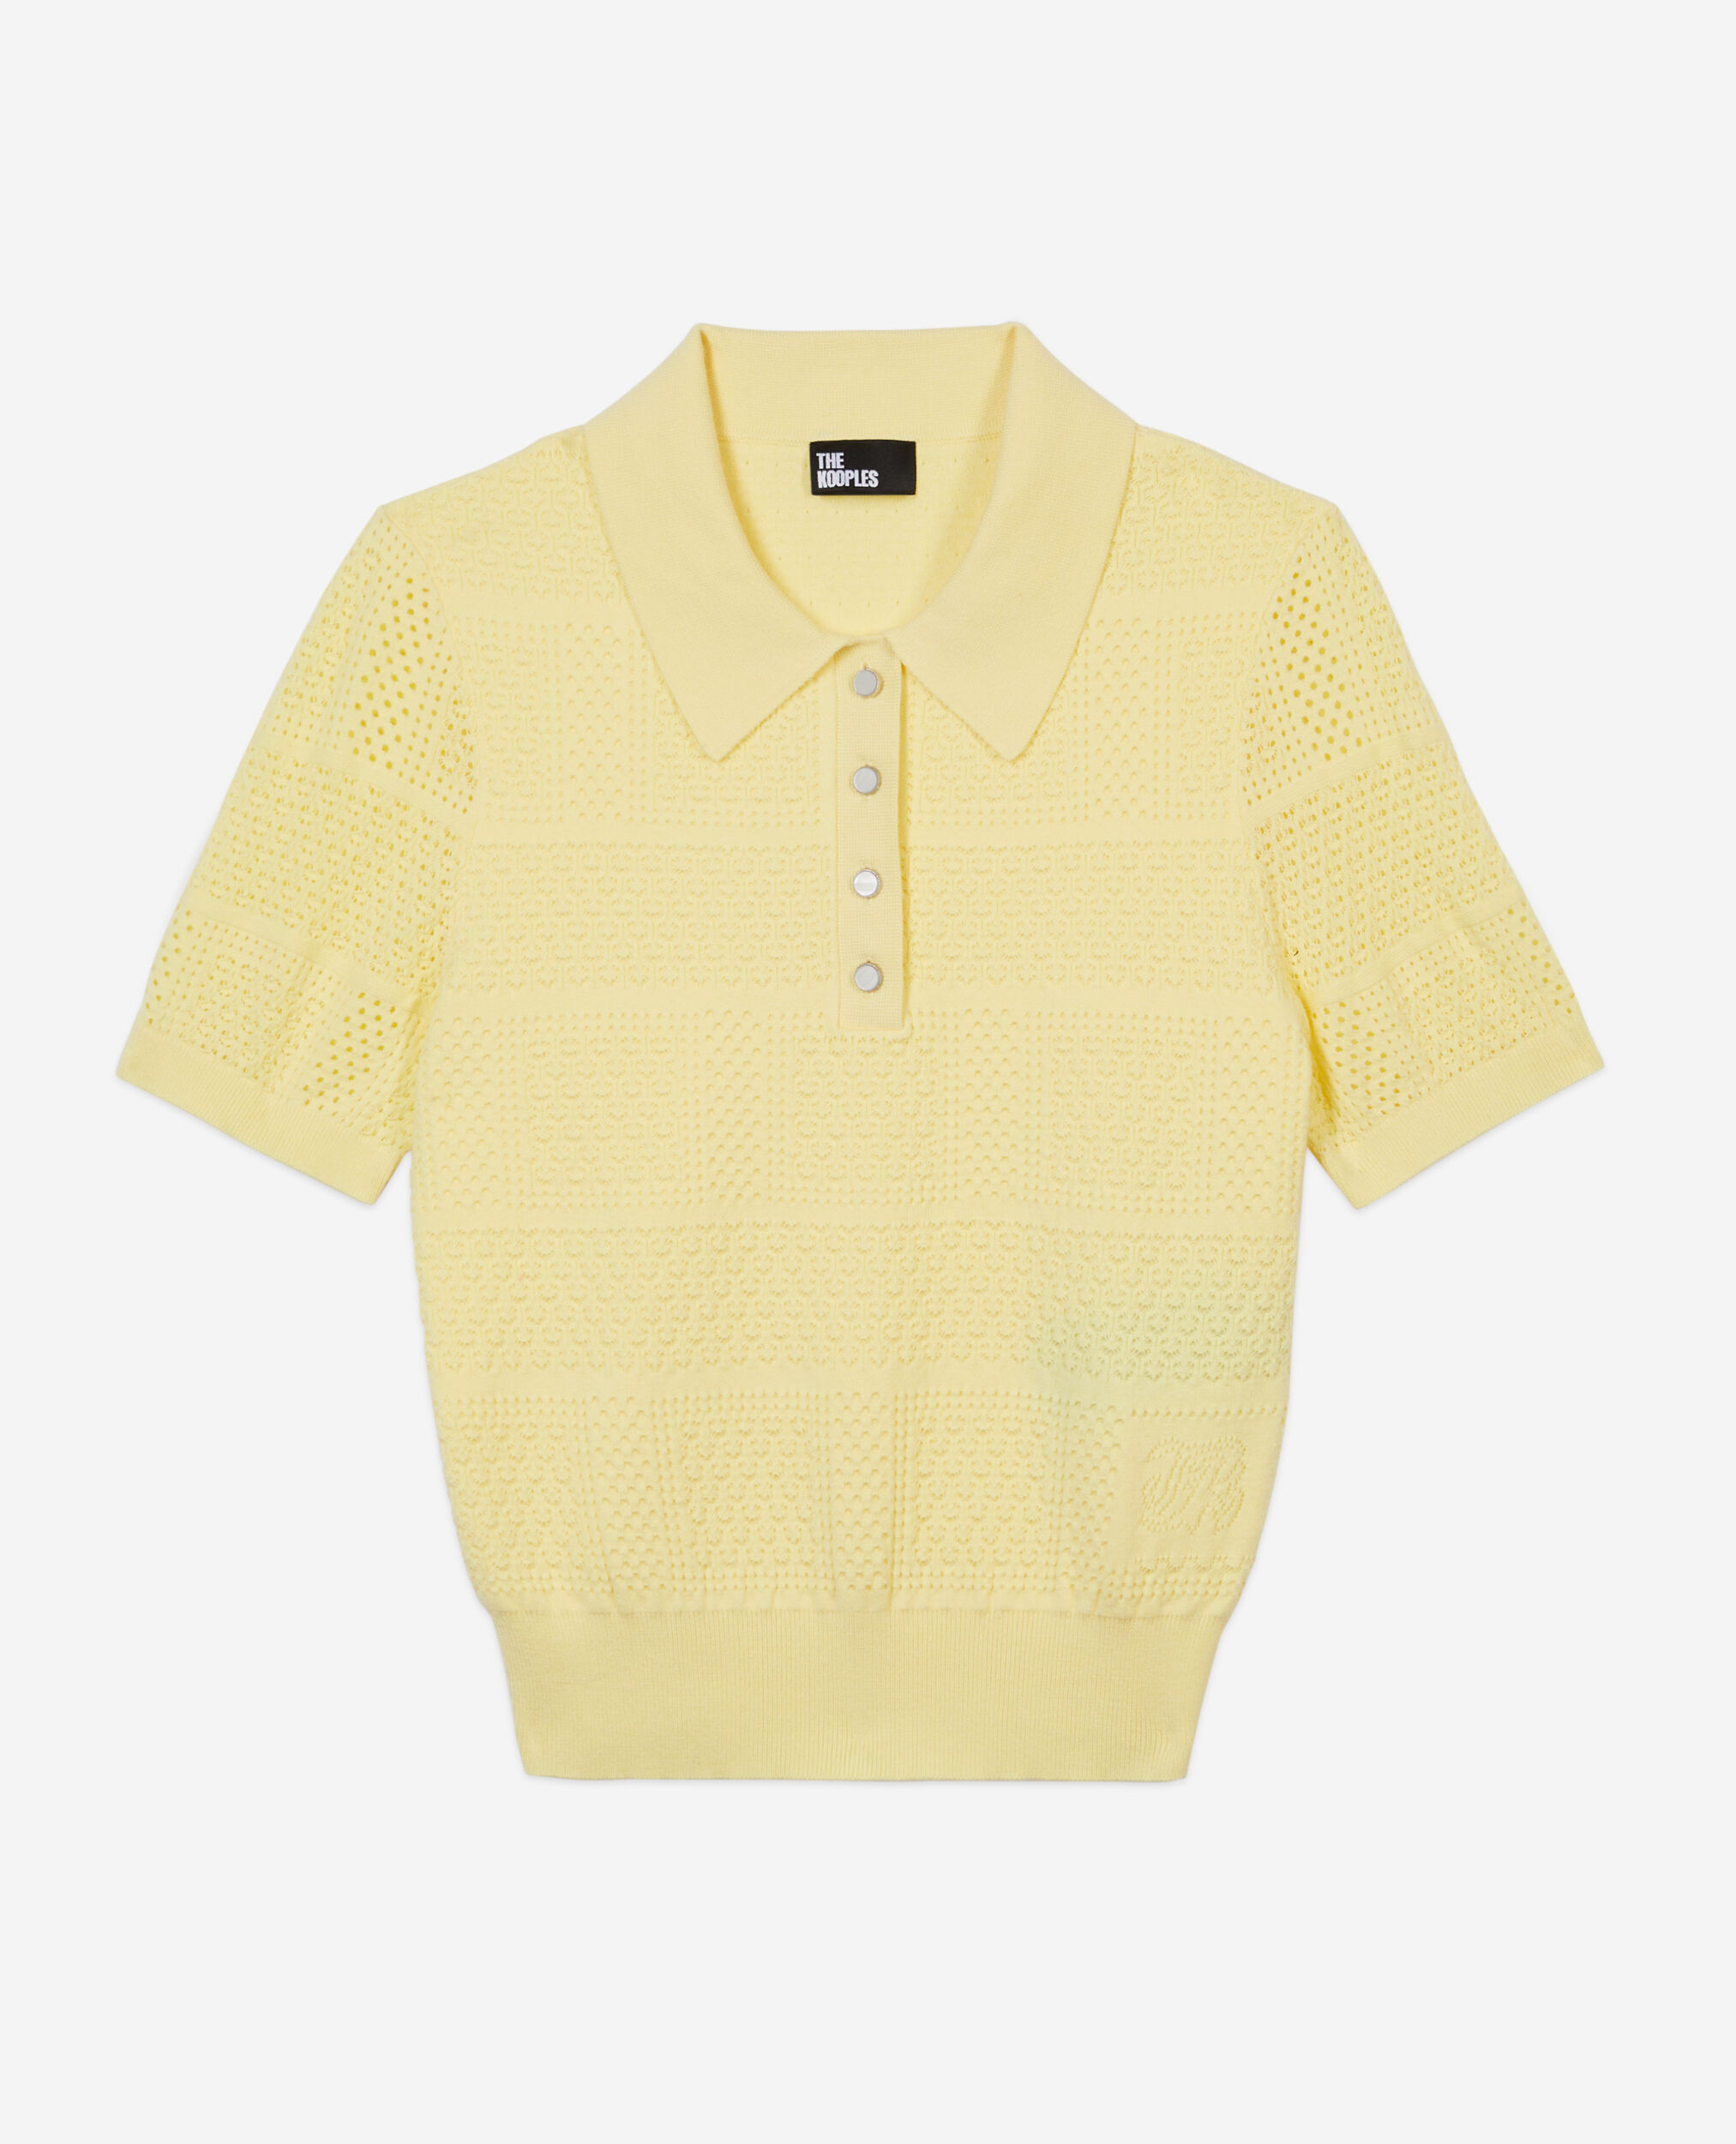 Polo jaune clair en maille ajourée, MELLOW YELLOW, hi-res image number null